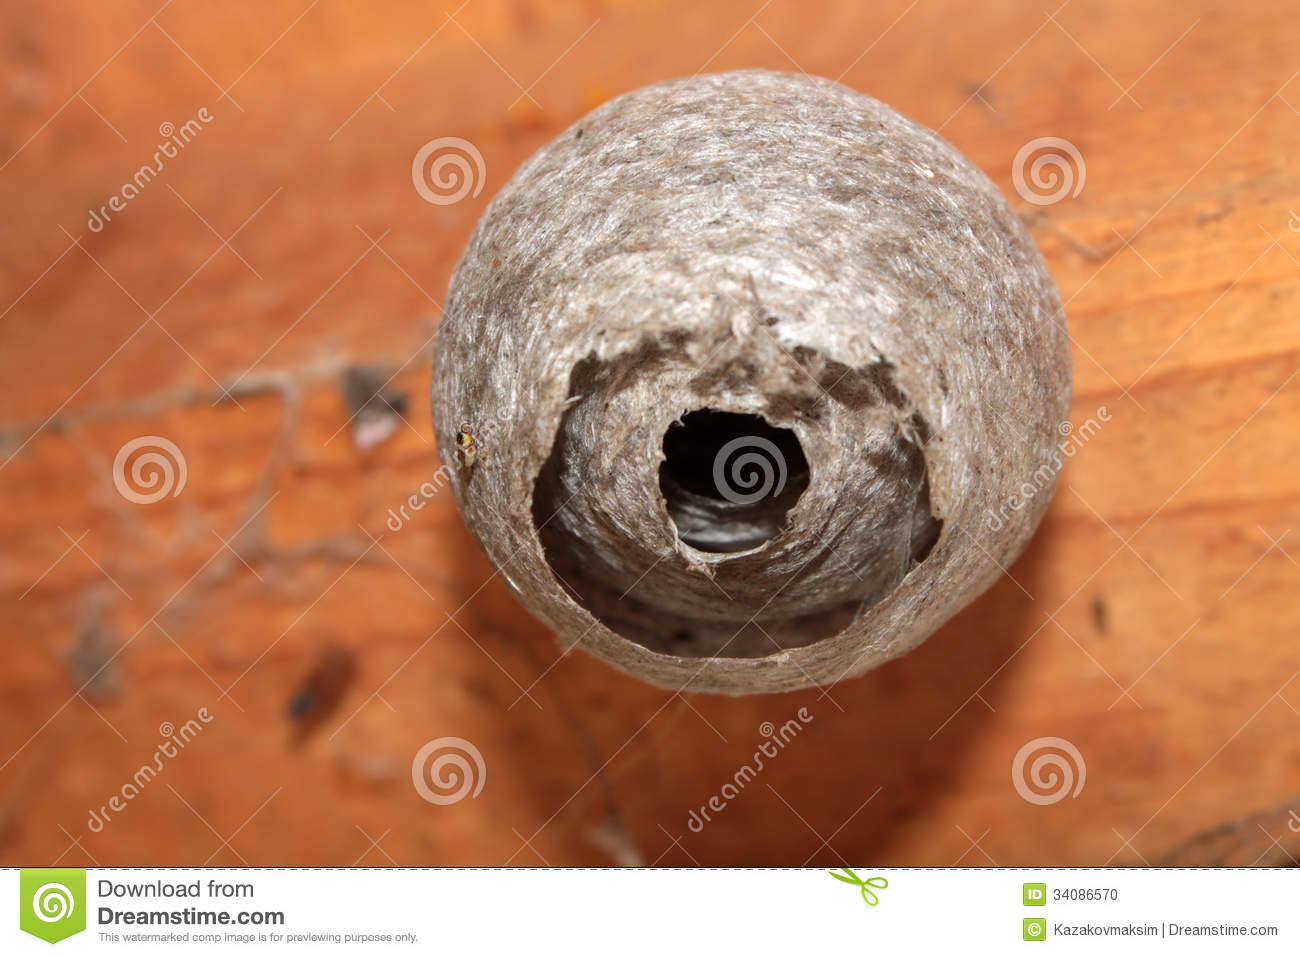 Wasp Nest On A Wooden Surface